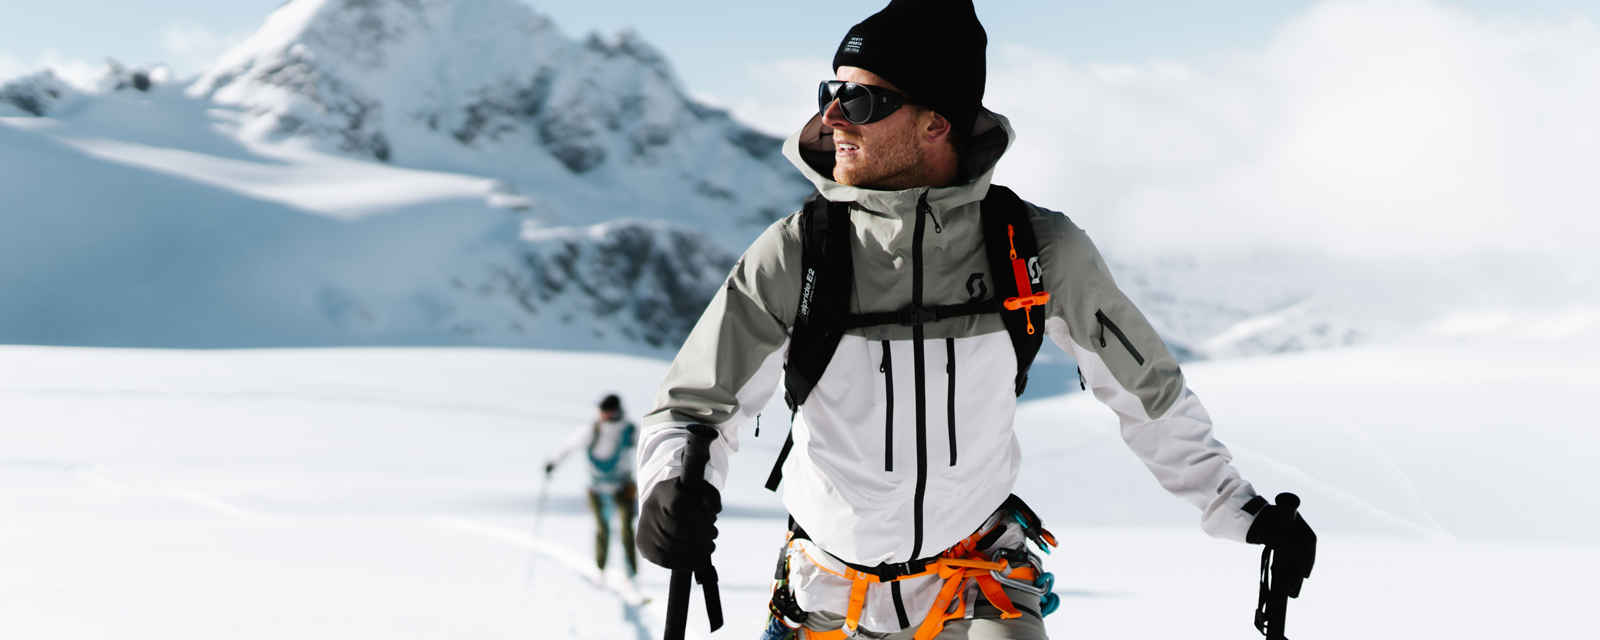 Men's Snow Country Outerwear Insulated Snow Pants - Ultimate Winter Gear  for Adventurous Men